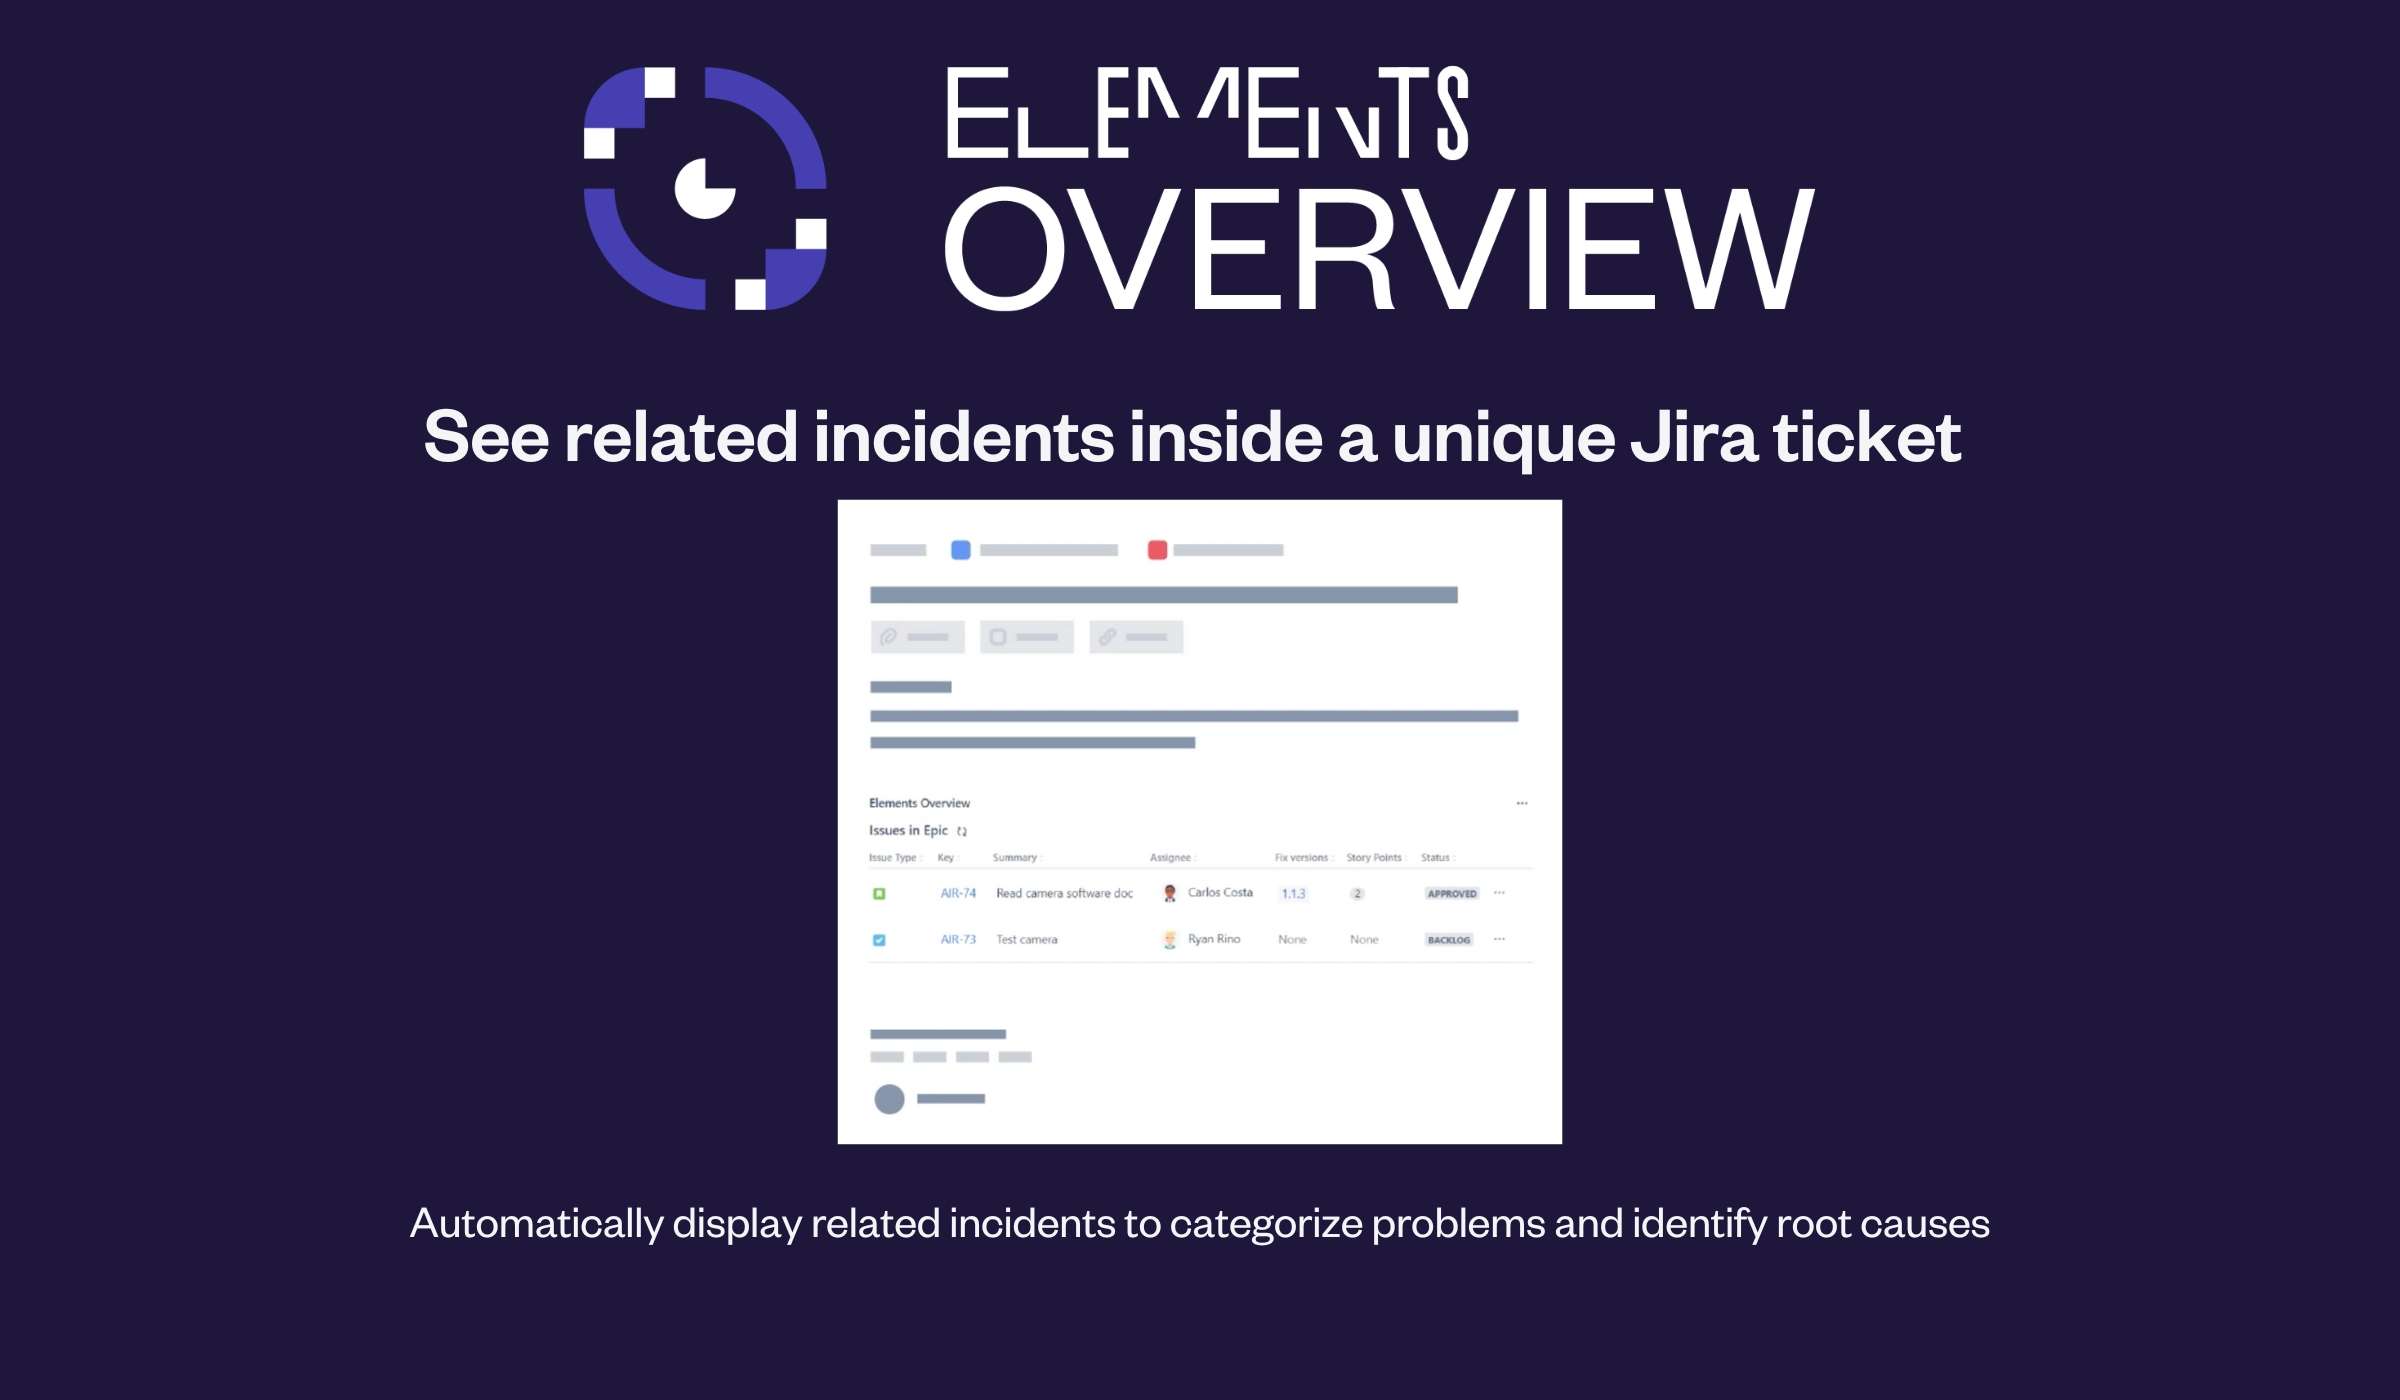 Incident management can be a challenging mission where speed, visibility, and collaboration are essential.

By showing all the related incidents in one place, directly on a problem itself, Elements Overview gives contextualized and actionable information, facilitating the investigation and speeding up the resolution.